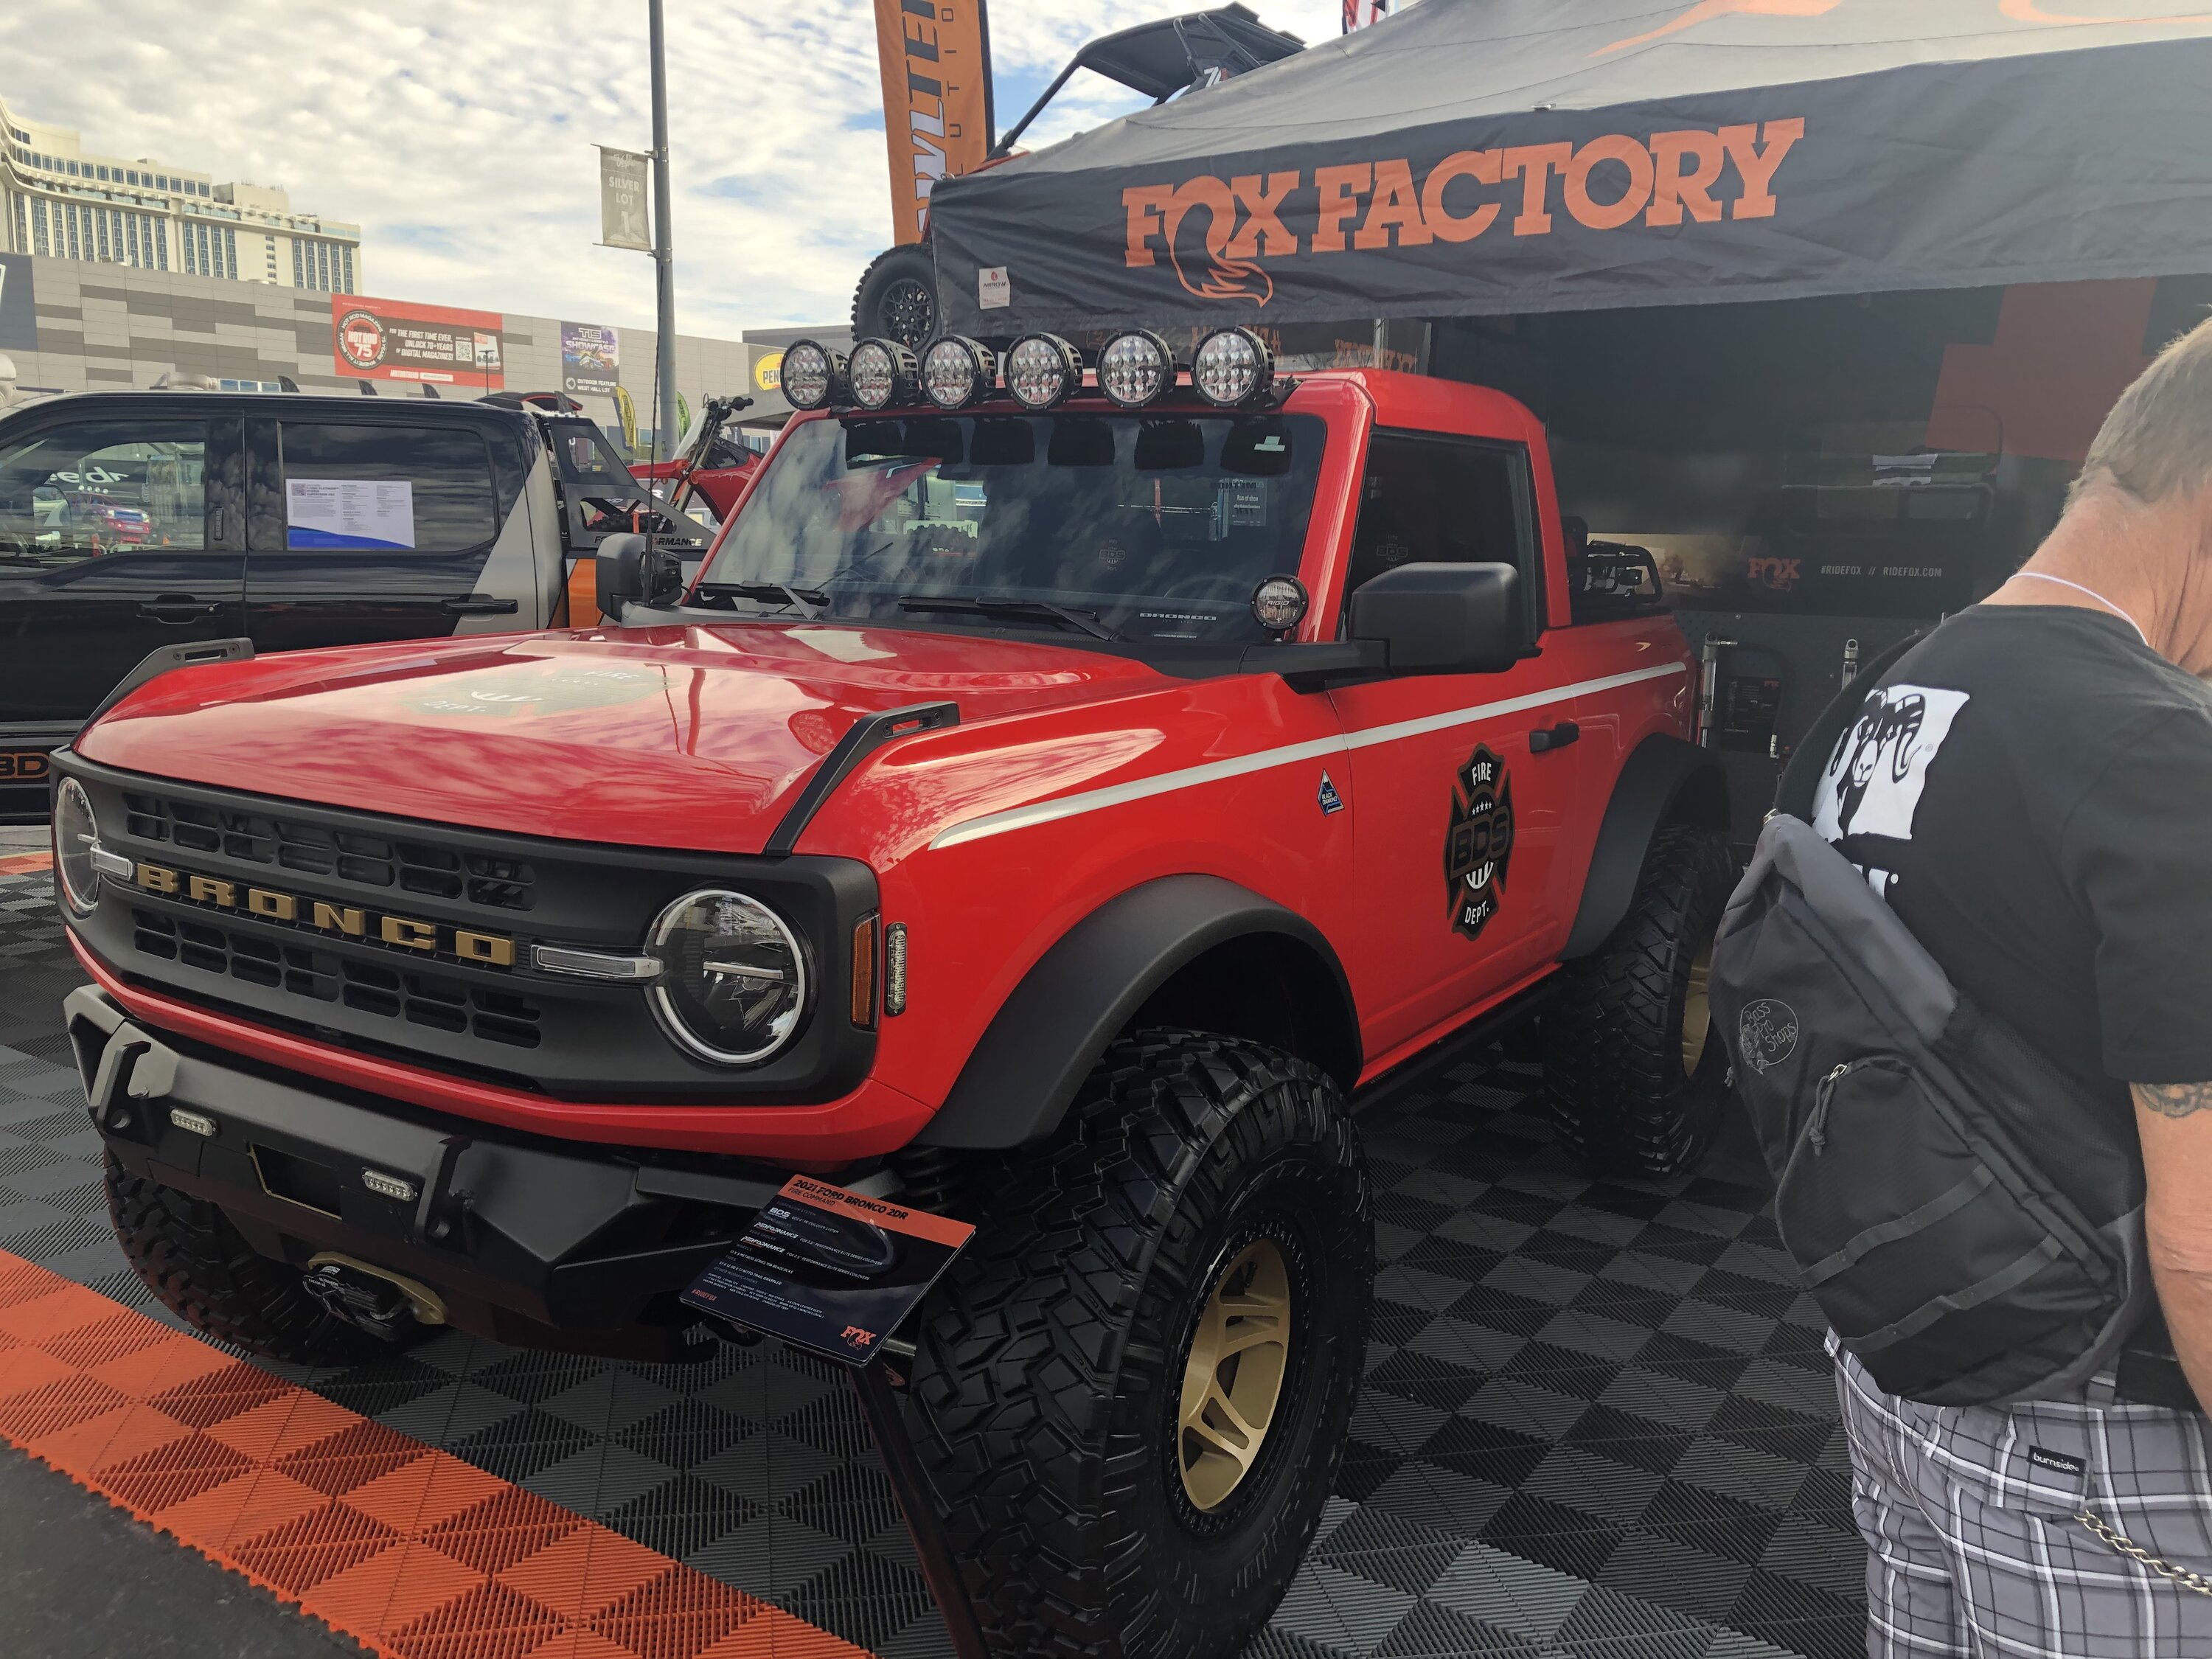 Ford Bronco Your favorite Bronco Builds? E599883D-4388-4F00-A2C4-A4DDC6FAAB6B